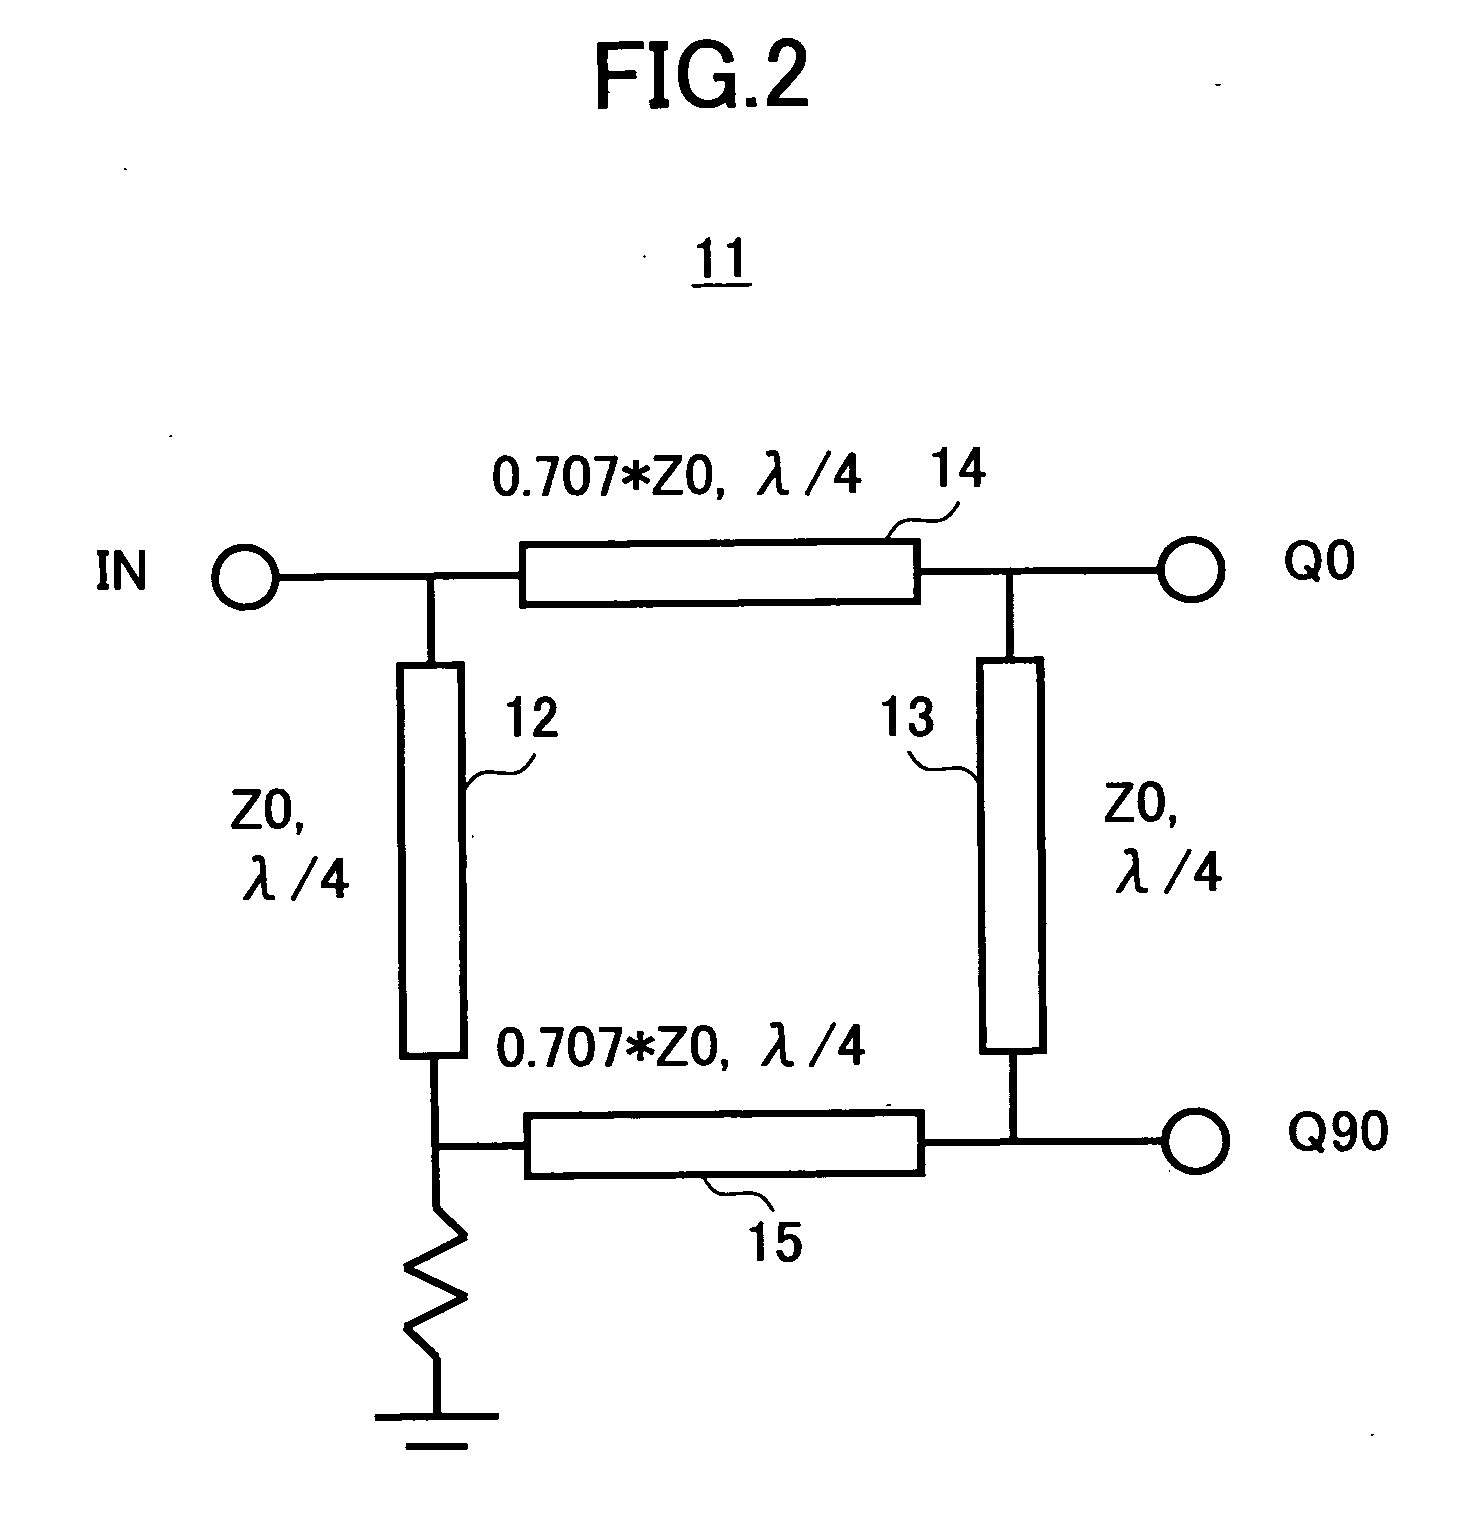 Phase shifter circuit with proper broadband performance